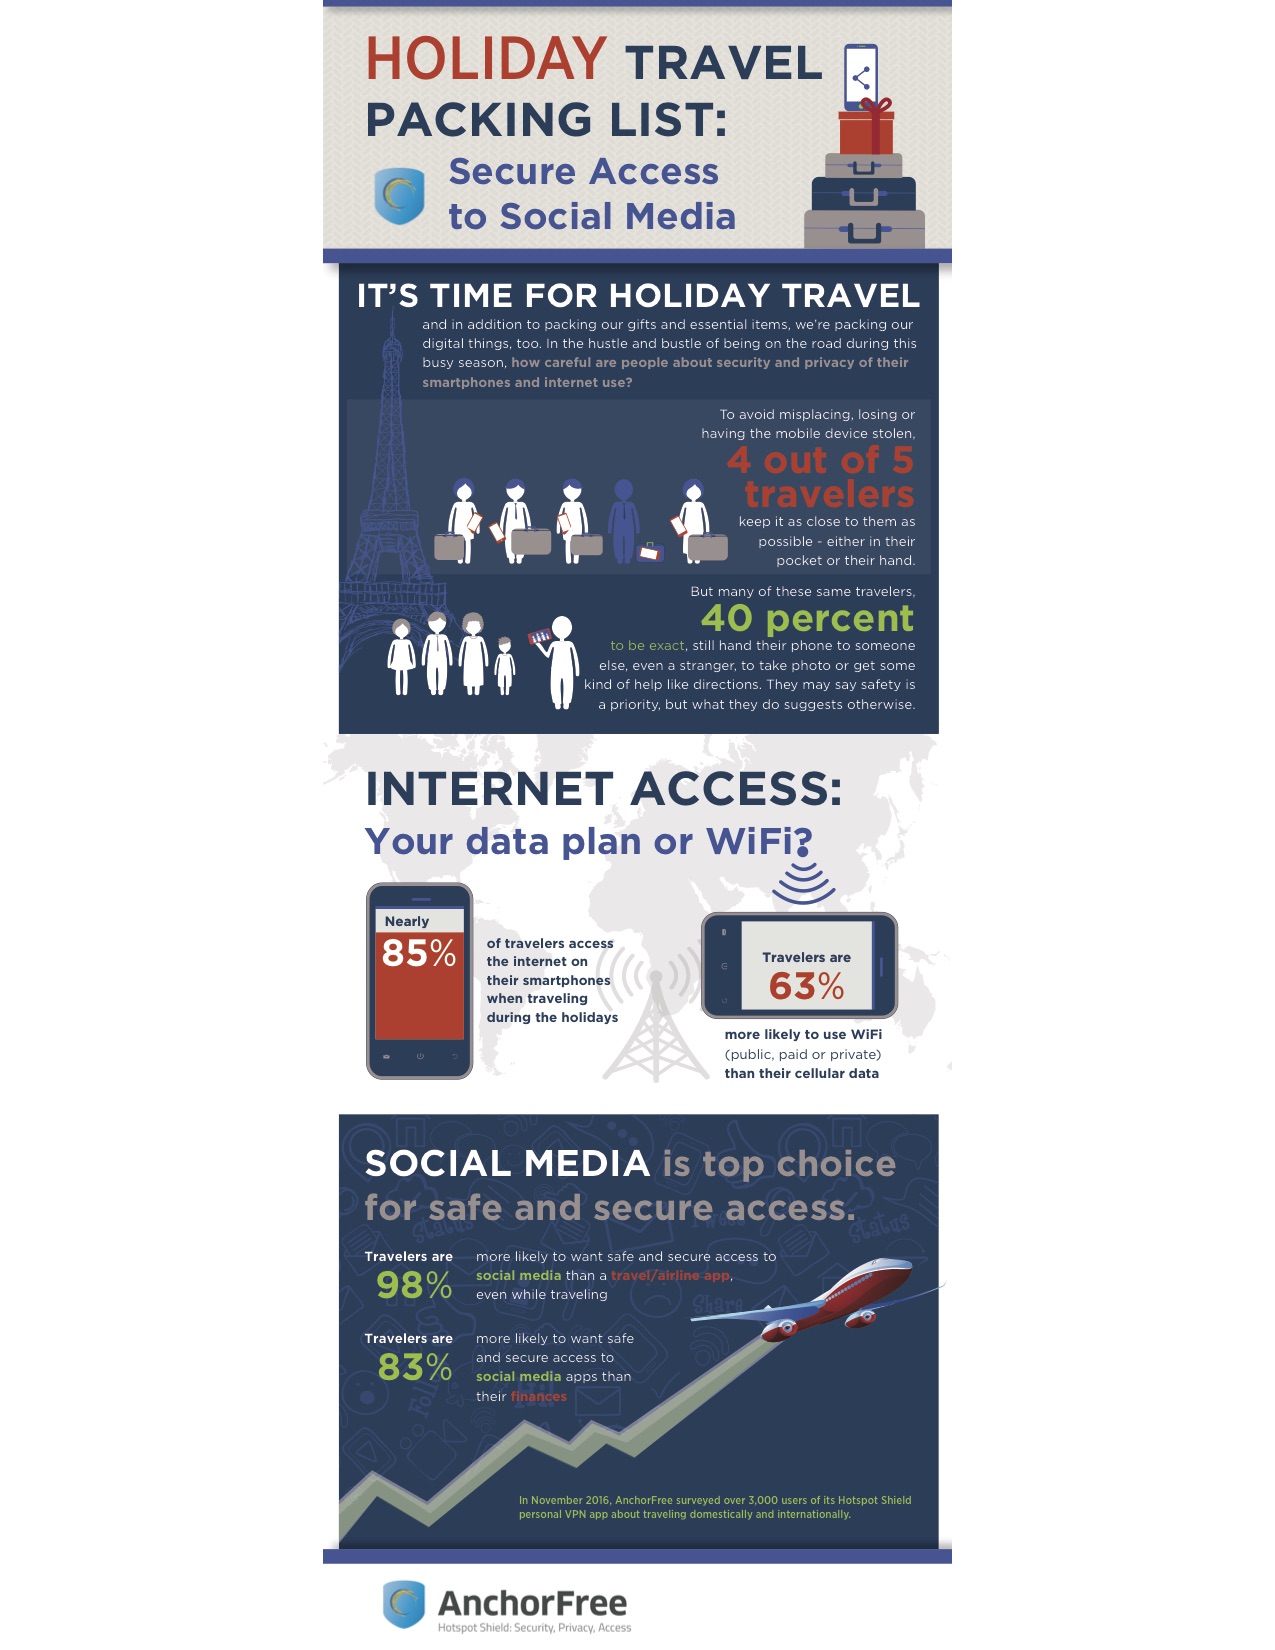 anchorfree-holiday-travel-infographic1